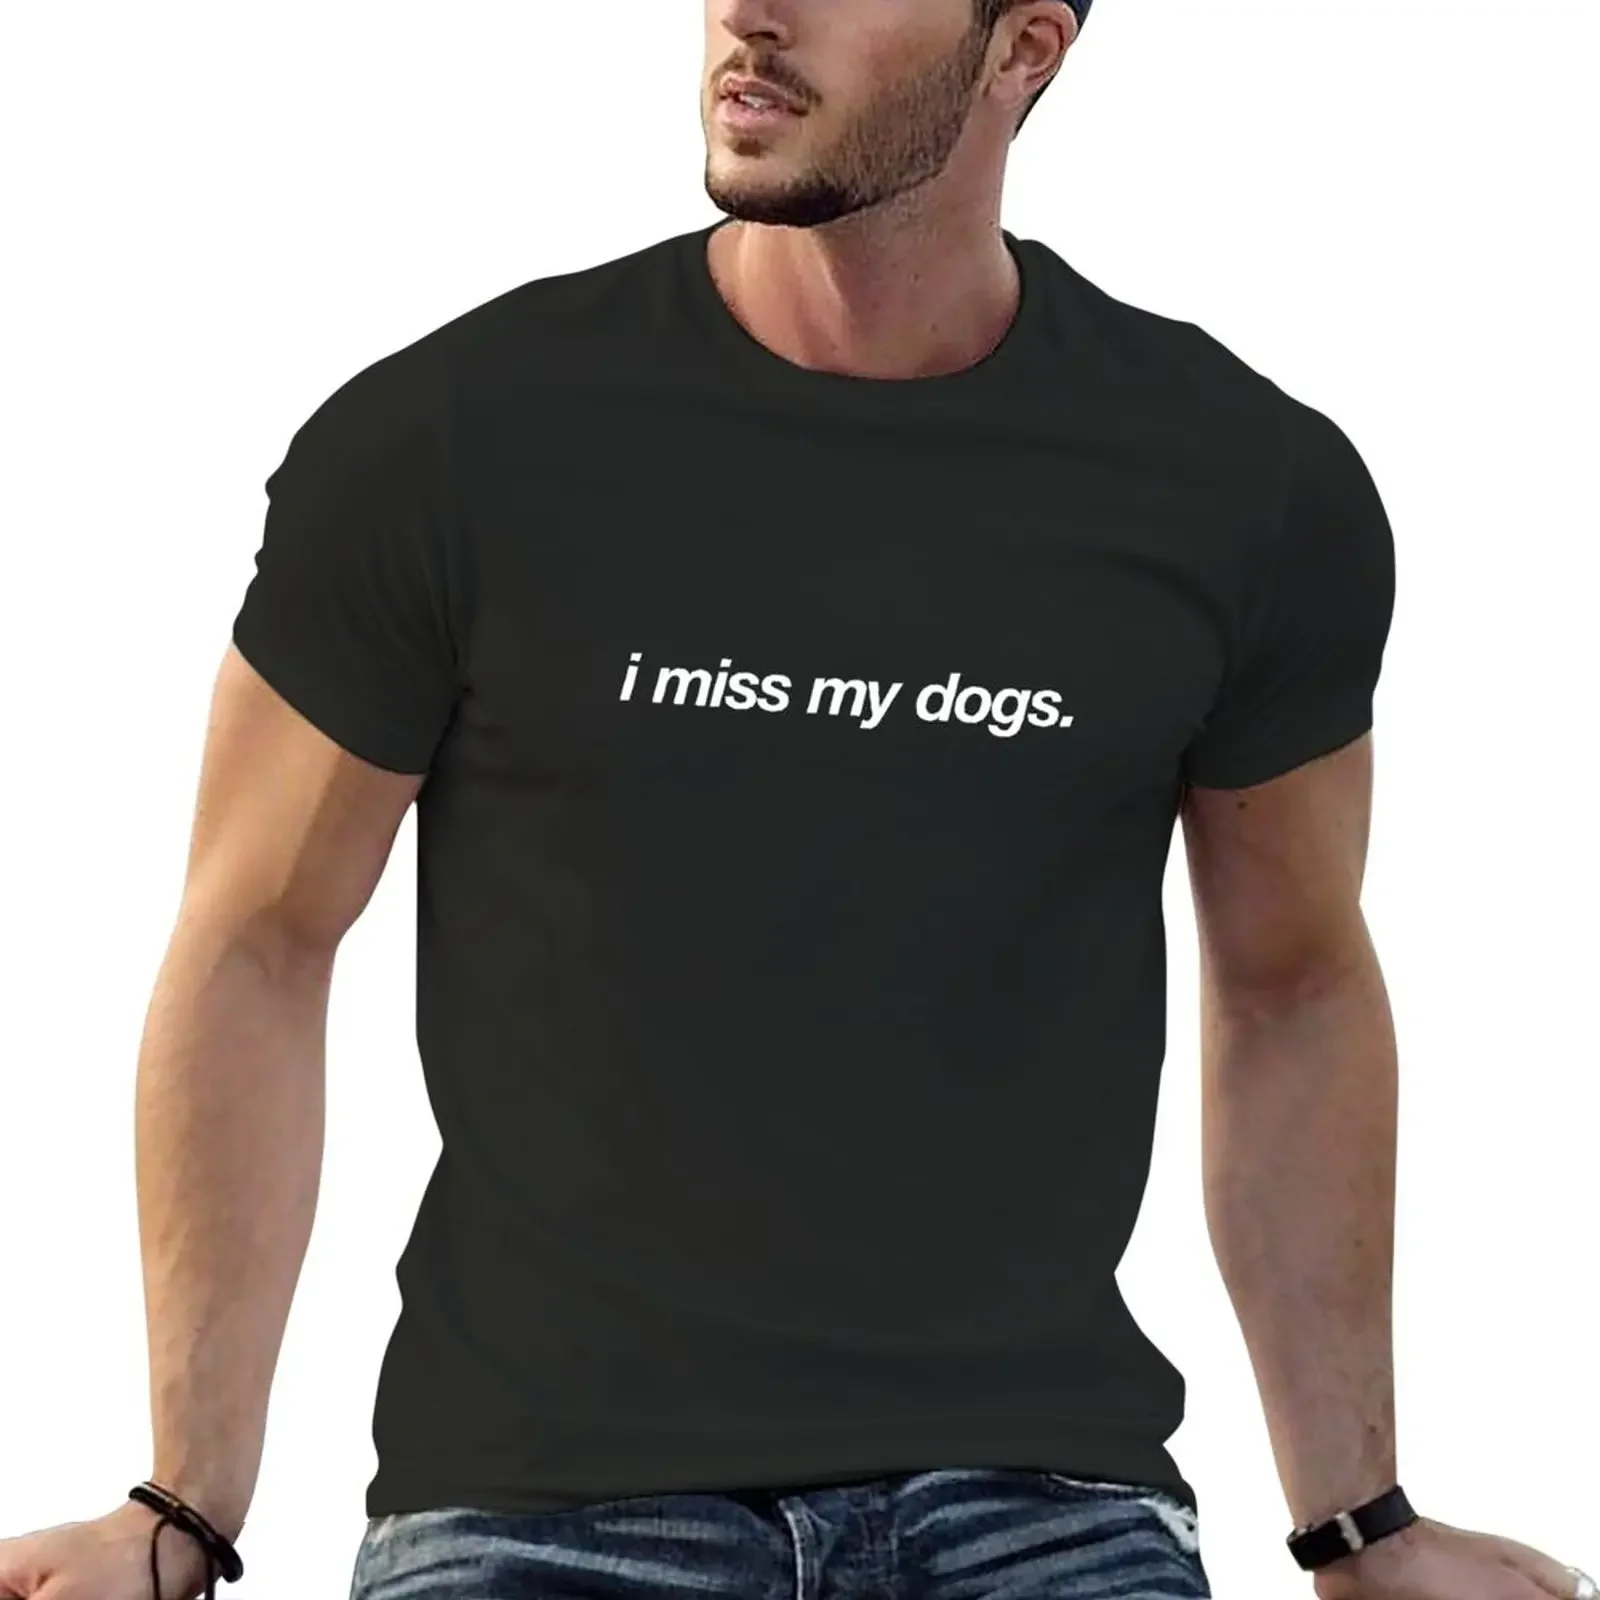 

I miss my dogs T-Shirt Aesthetic clothing graphics boys whites t shirt for men